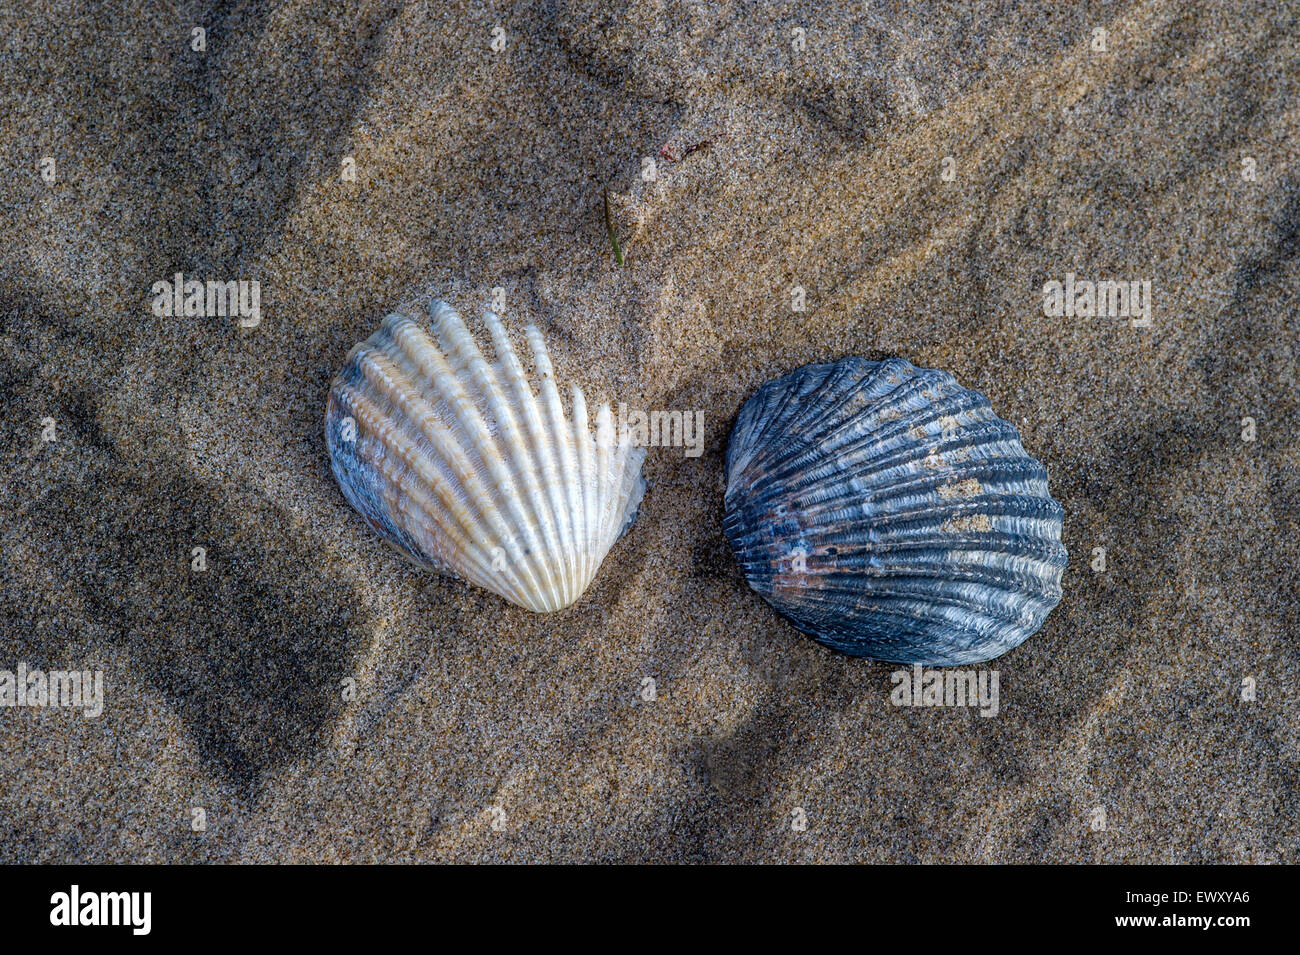 33+ Thousand Cockle Shell Royalty-Free Images, Stock Photos